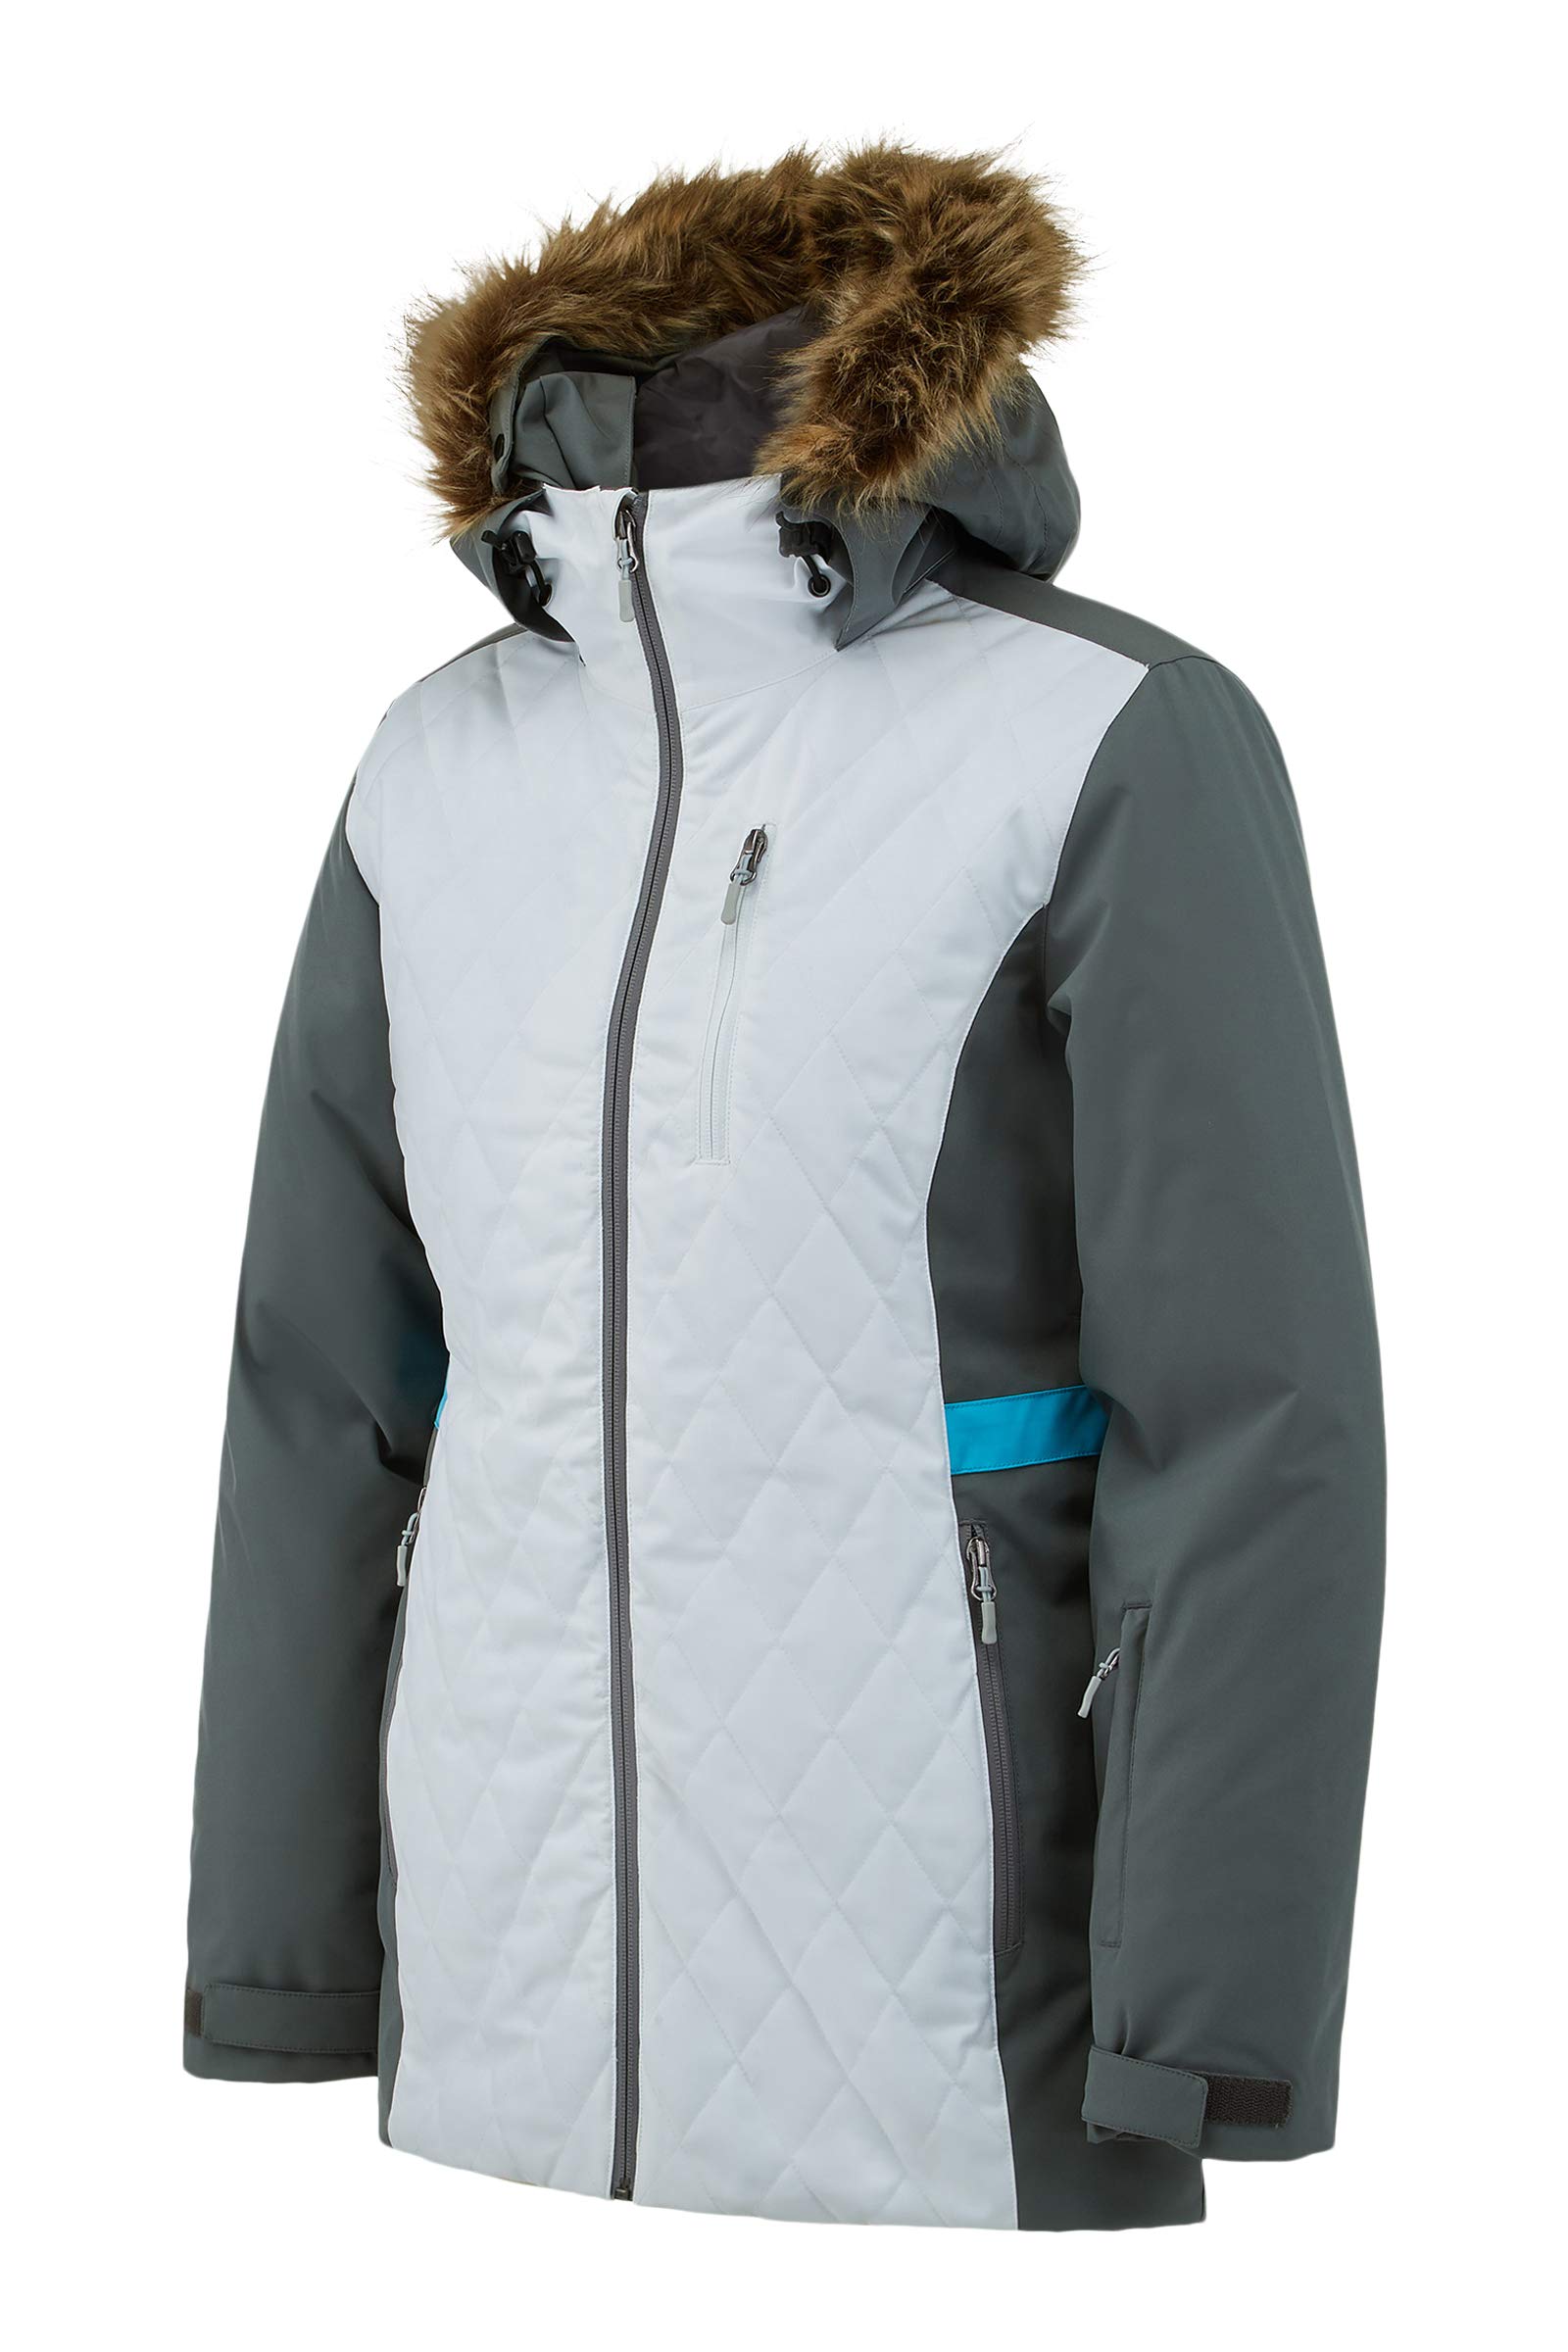 Spyder Active Sports Women's Crossover Insulated Ski Jacket